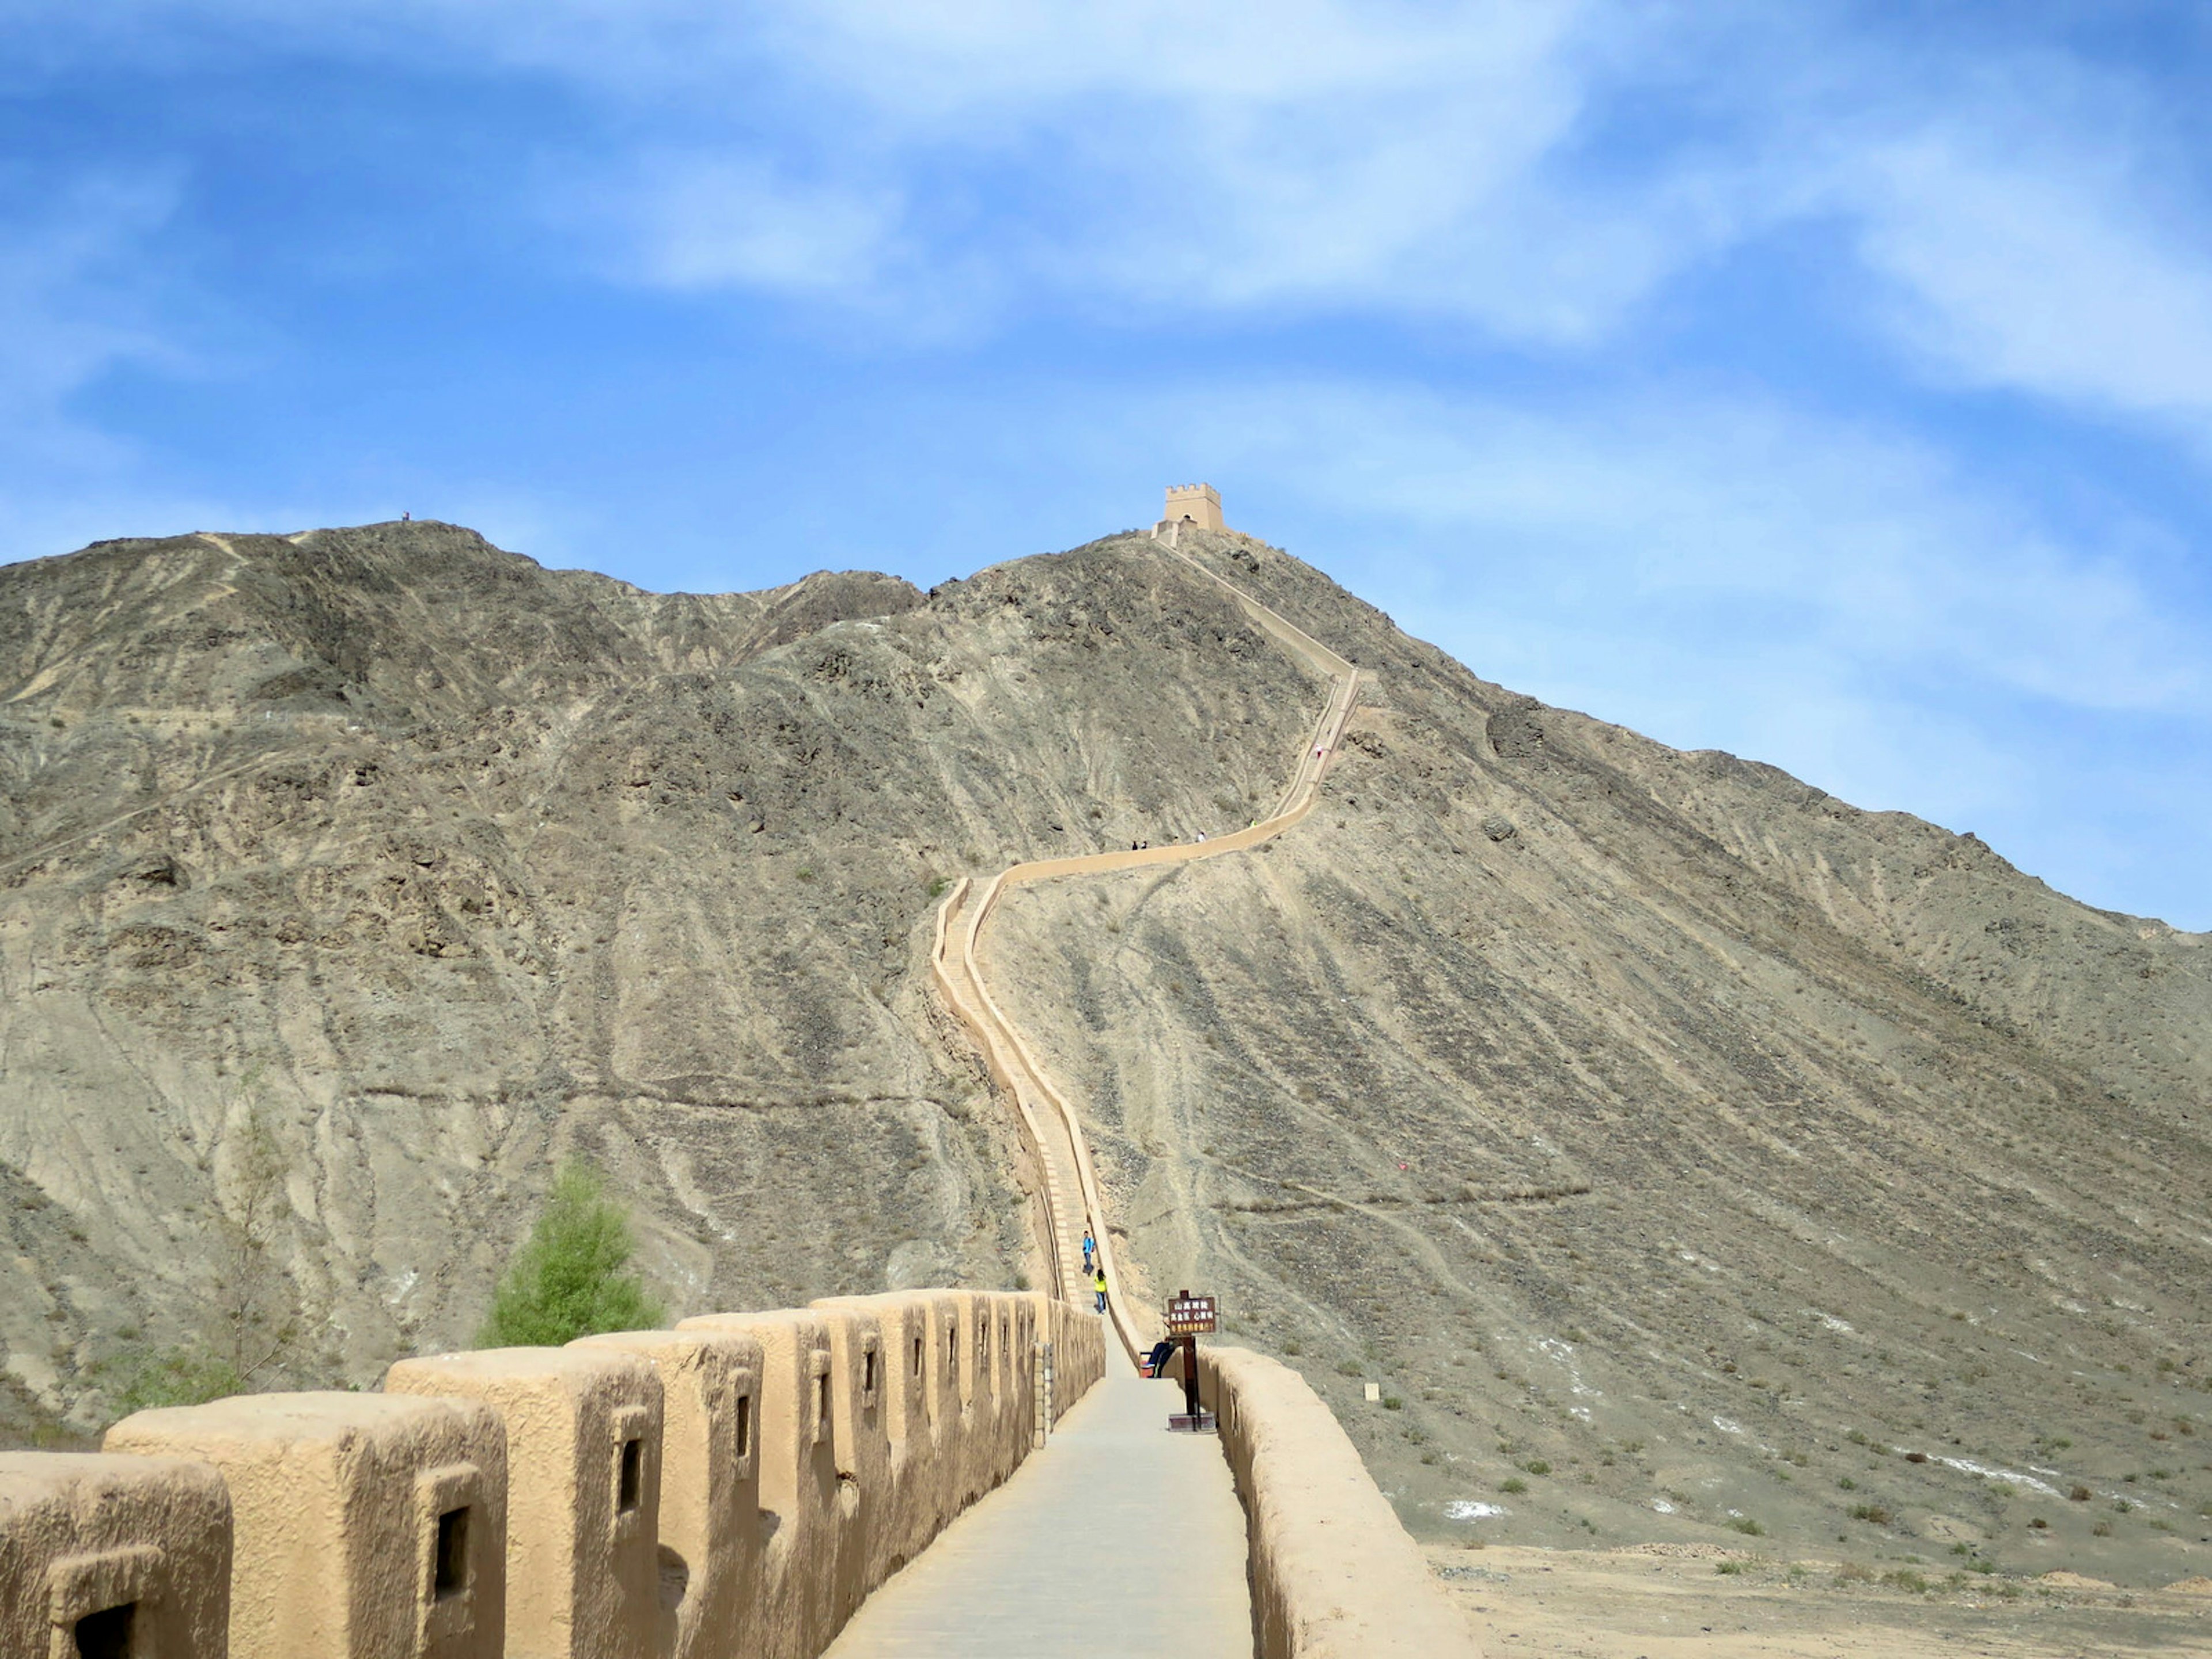 Climbing the Overhanging Great Wall at Jiayuguan © Megan Eaves / Lonely Planet